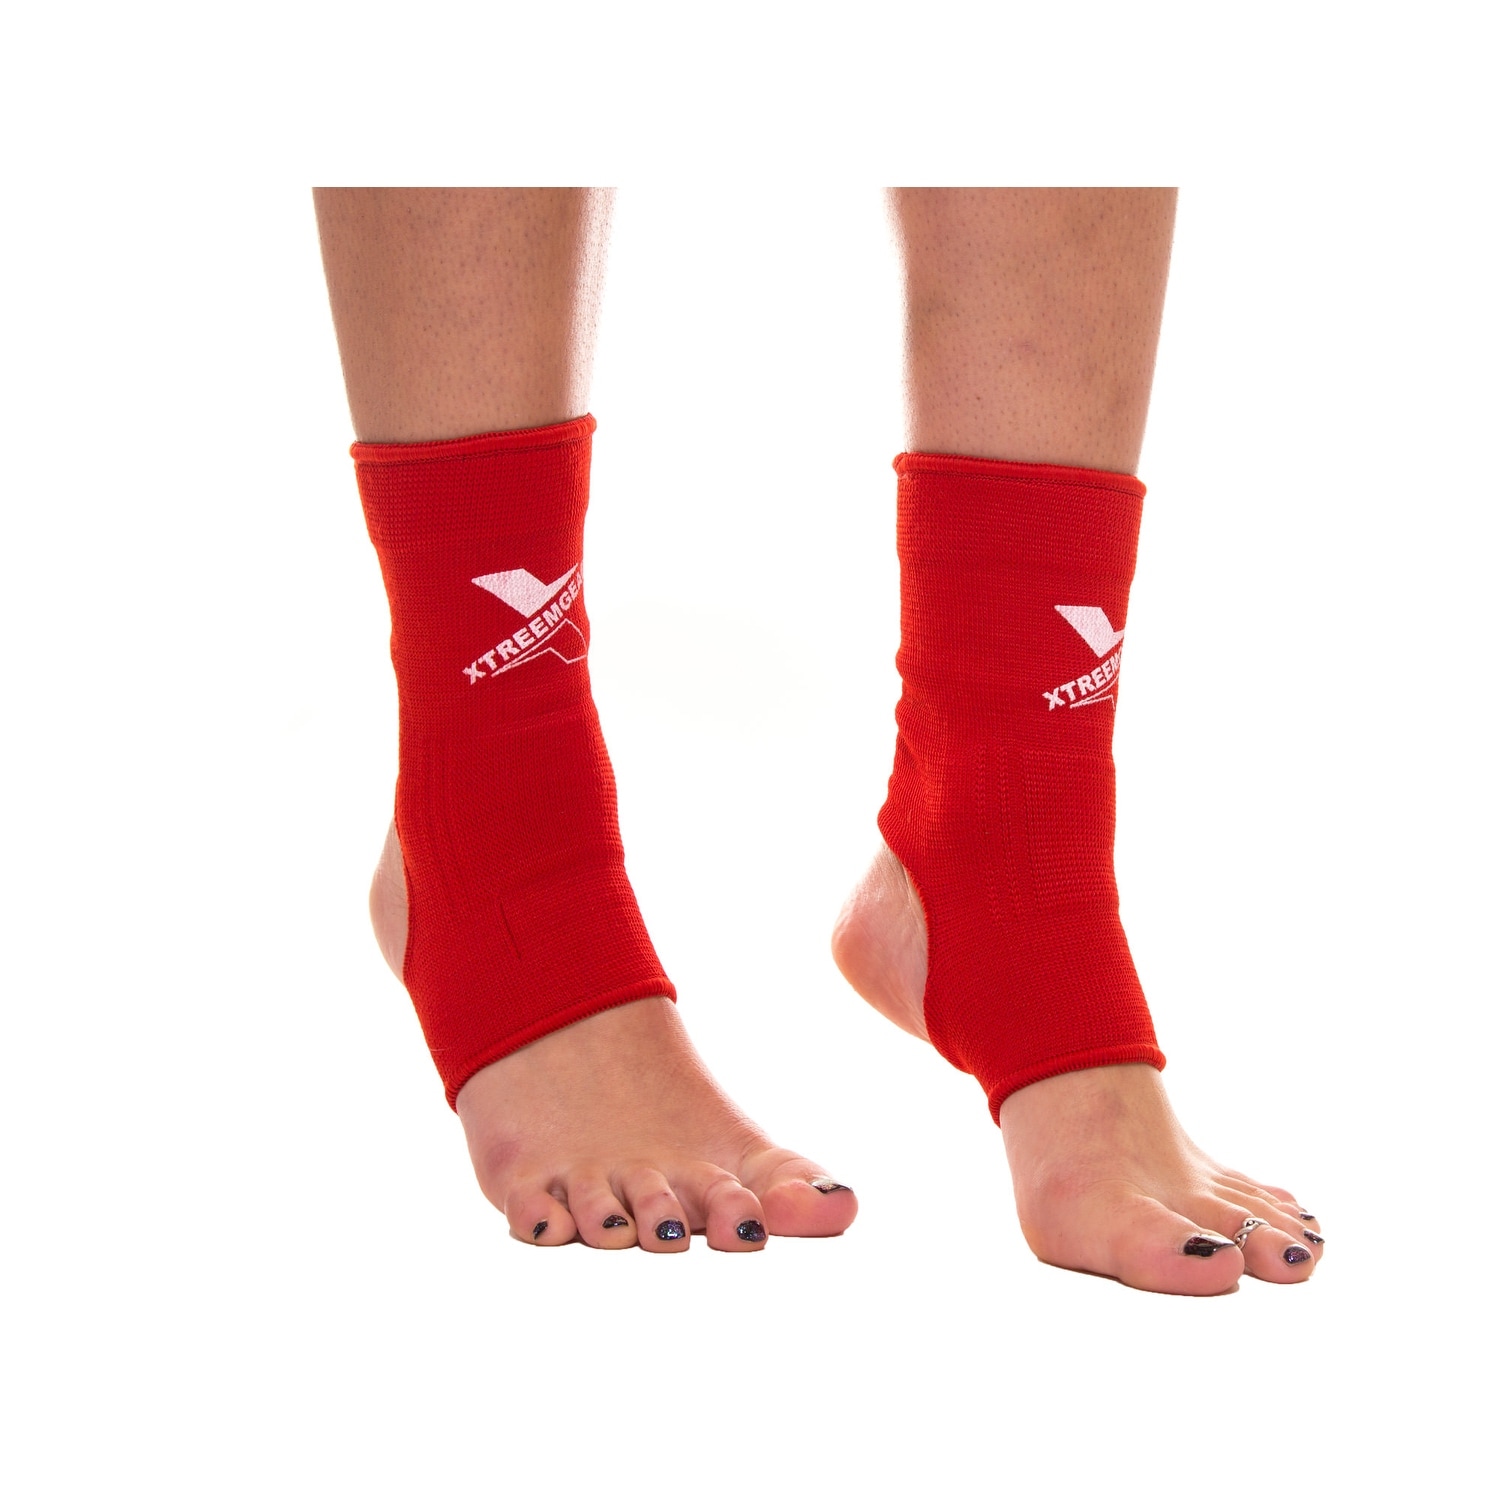 https://ak1.ostkcdn.com/images/products/is/images/direct/02f1ae42acdbe16412bfd43d190b460f6af7ffaf/Ankle-Supports-Muay-Thai-Compression-Kick-Boxing-Wraps-Gym-Socks-AB1.jpg